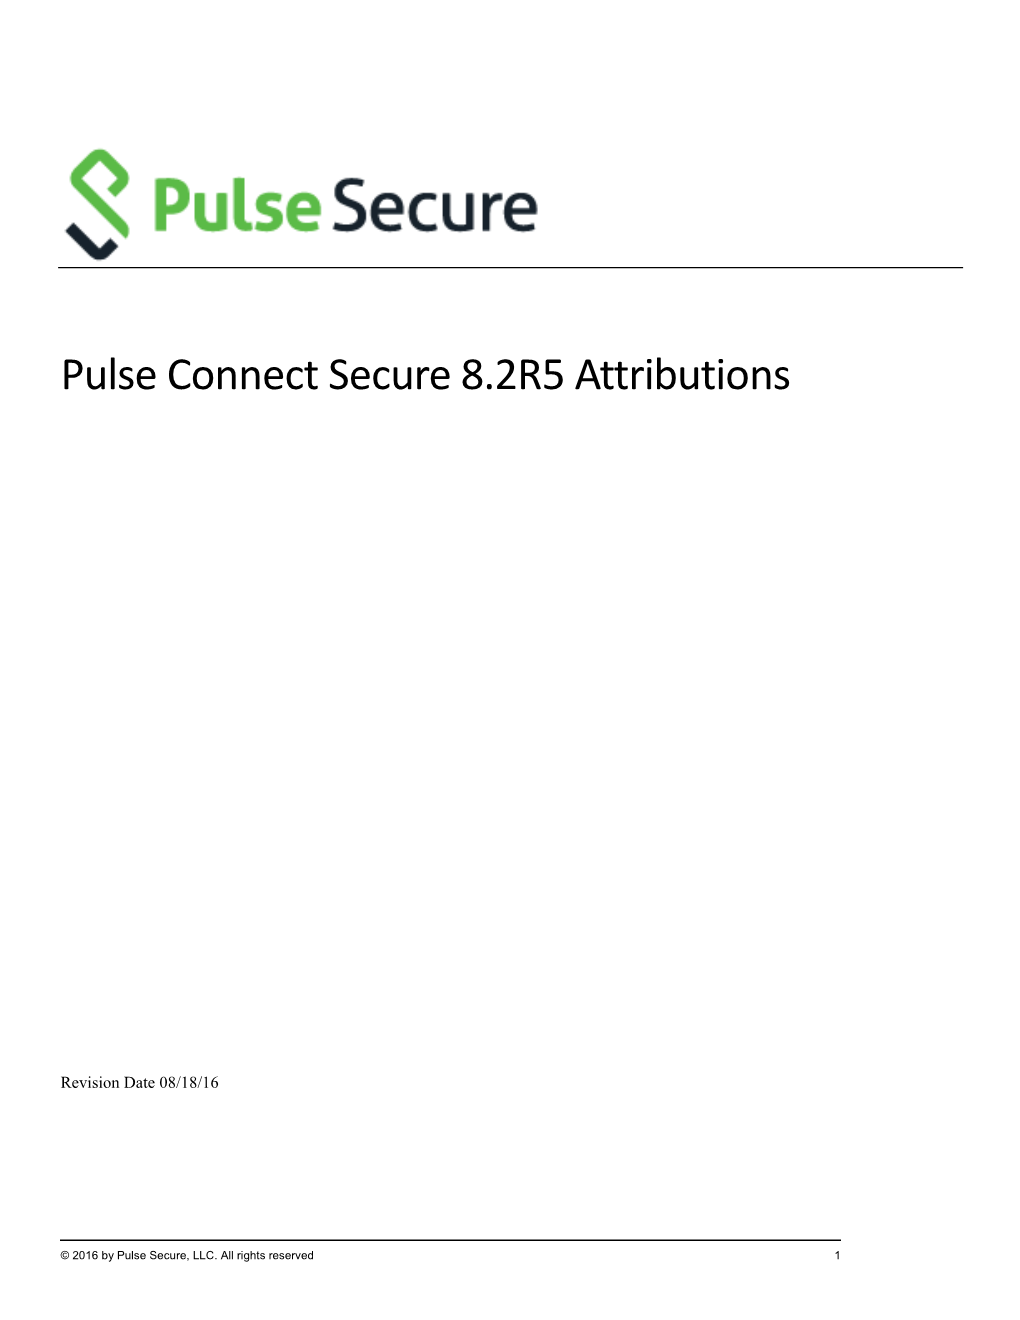 Pulse Connect Secure 8.2R5 Attributions